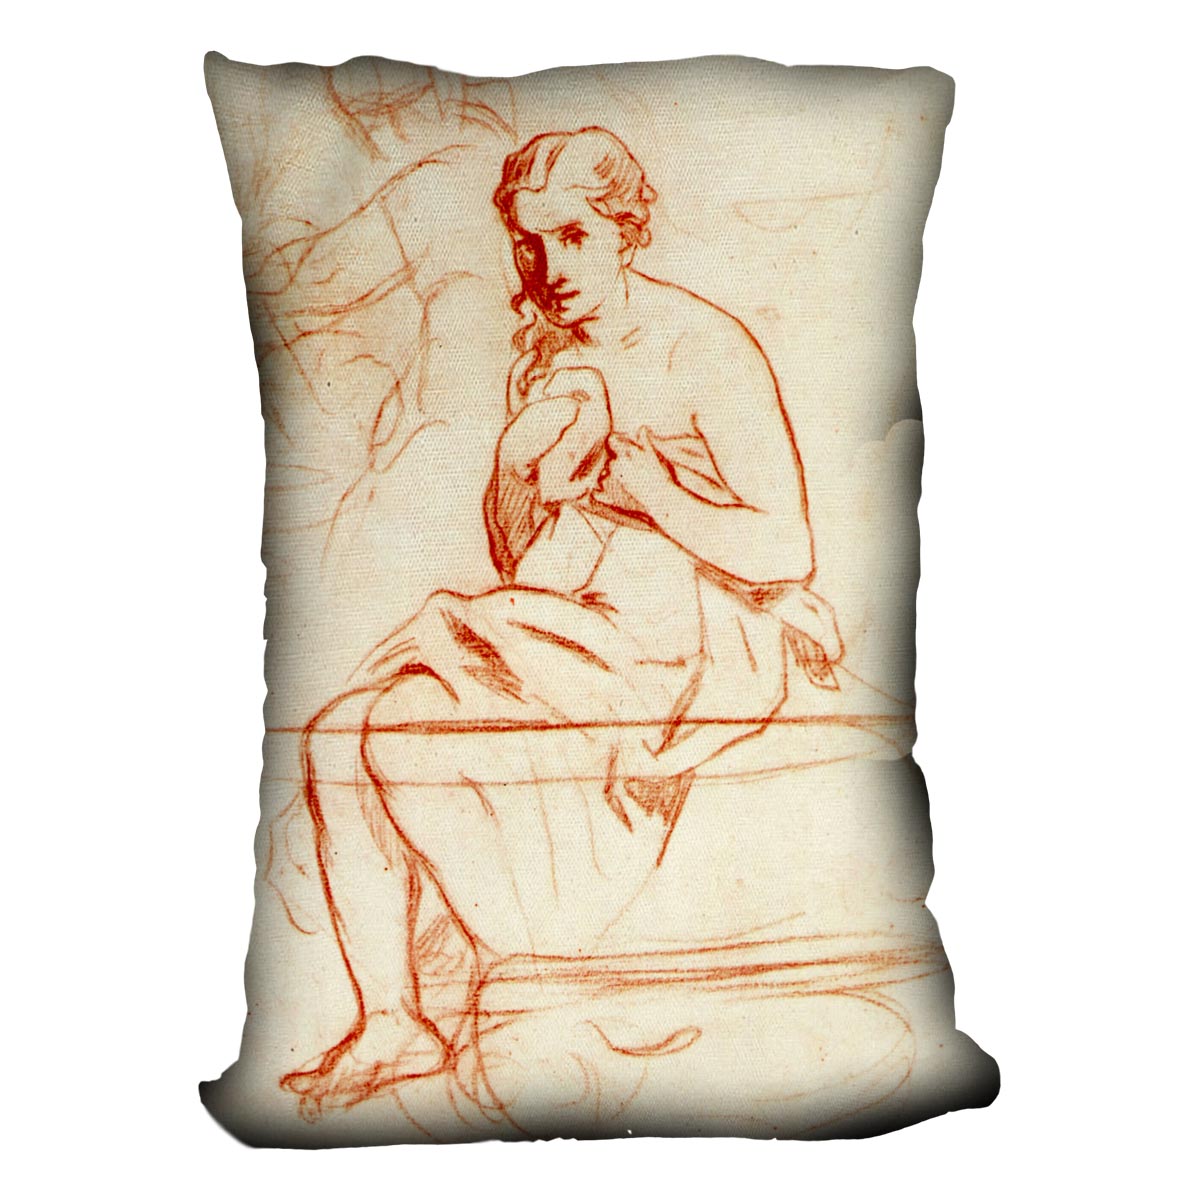 Women at the Toilet by Manet Cushion